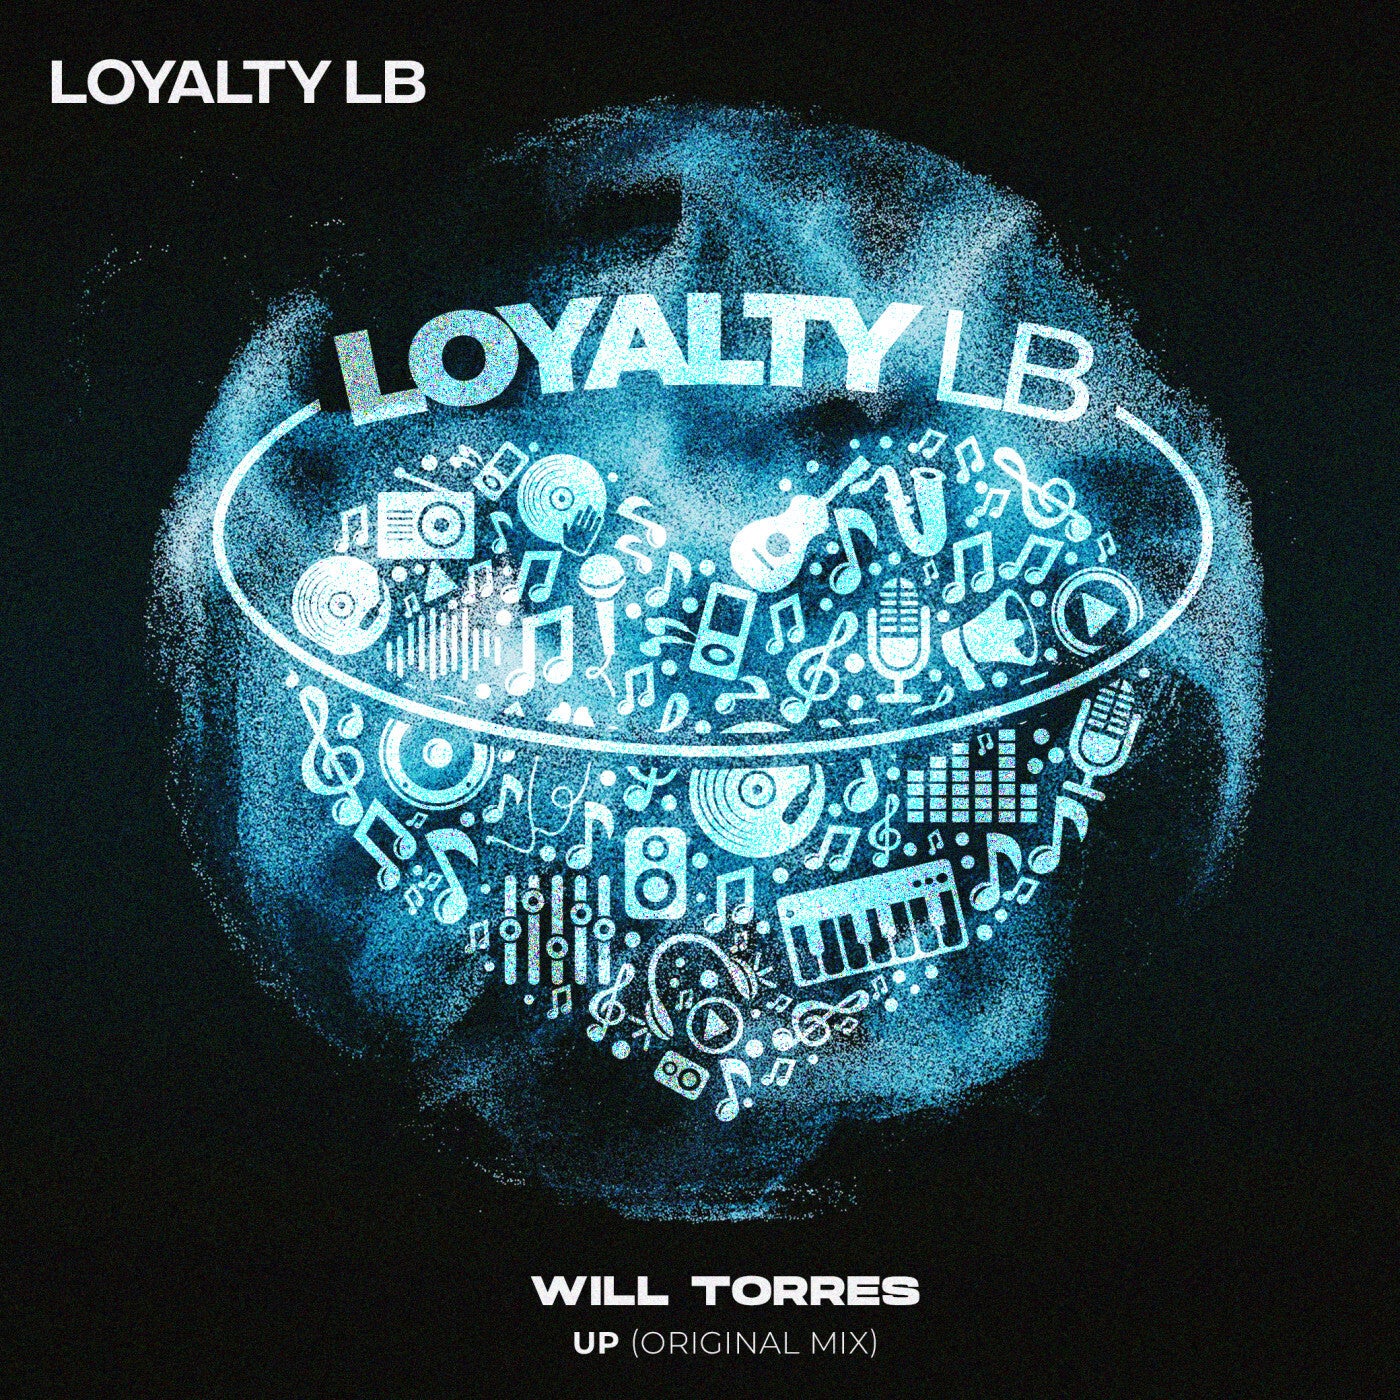 image cover: Will Torres - Up (Original Mix) on Loyalty LB